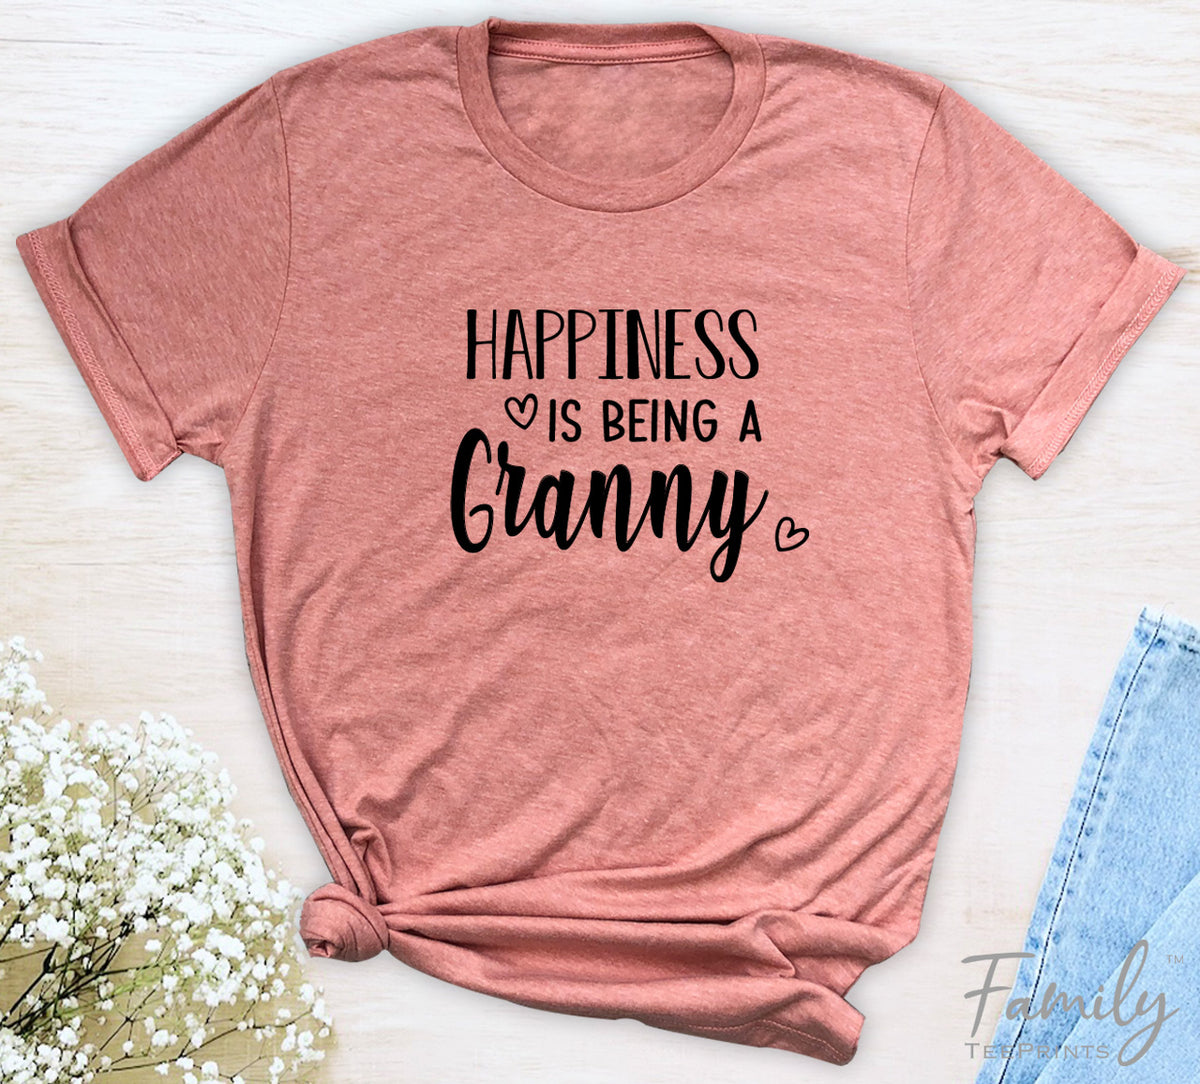 Happiness Is Being A Granny - Unisex T-shirt - Granny Shirt - Gift for Granny - familyteeprints